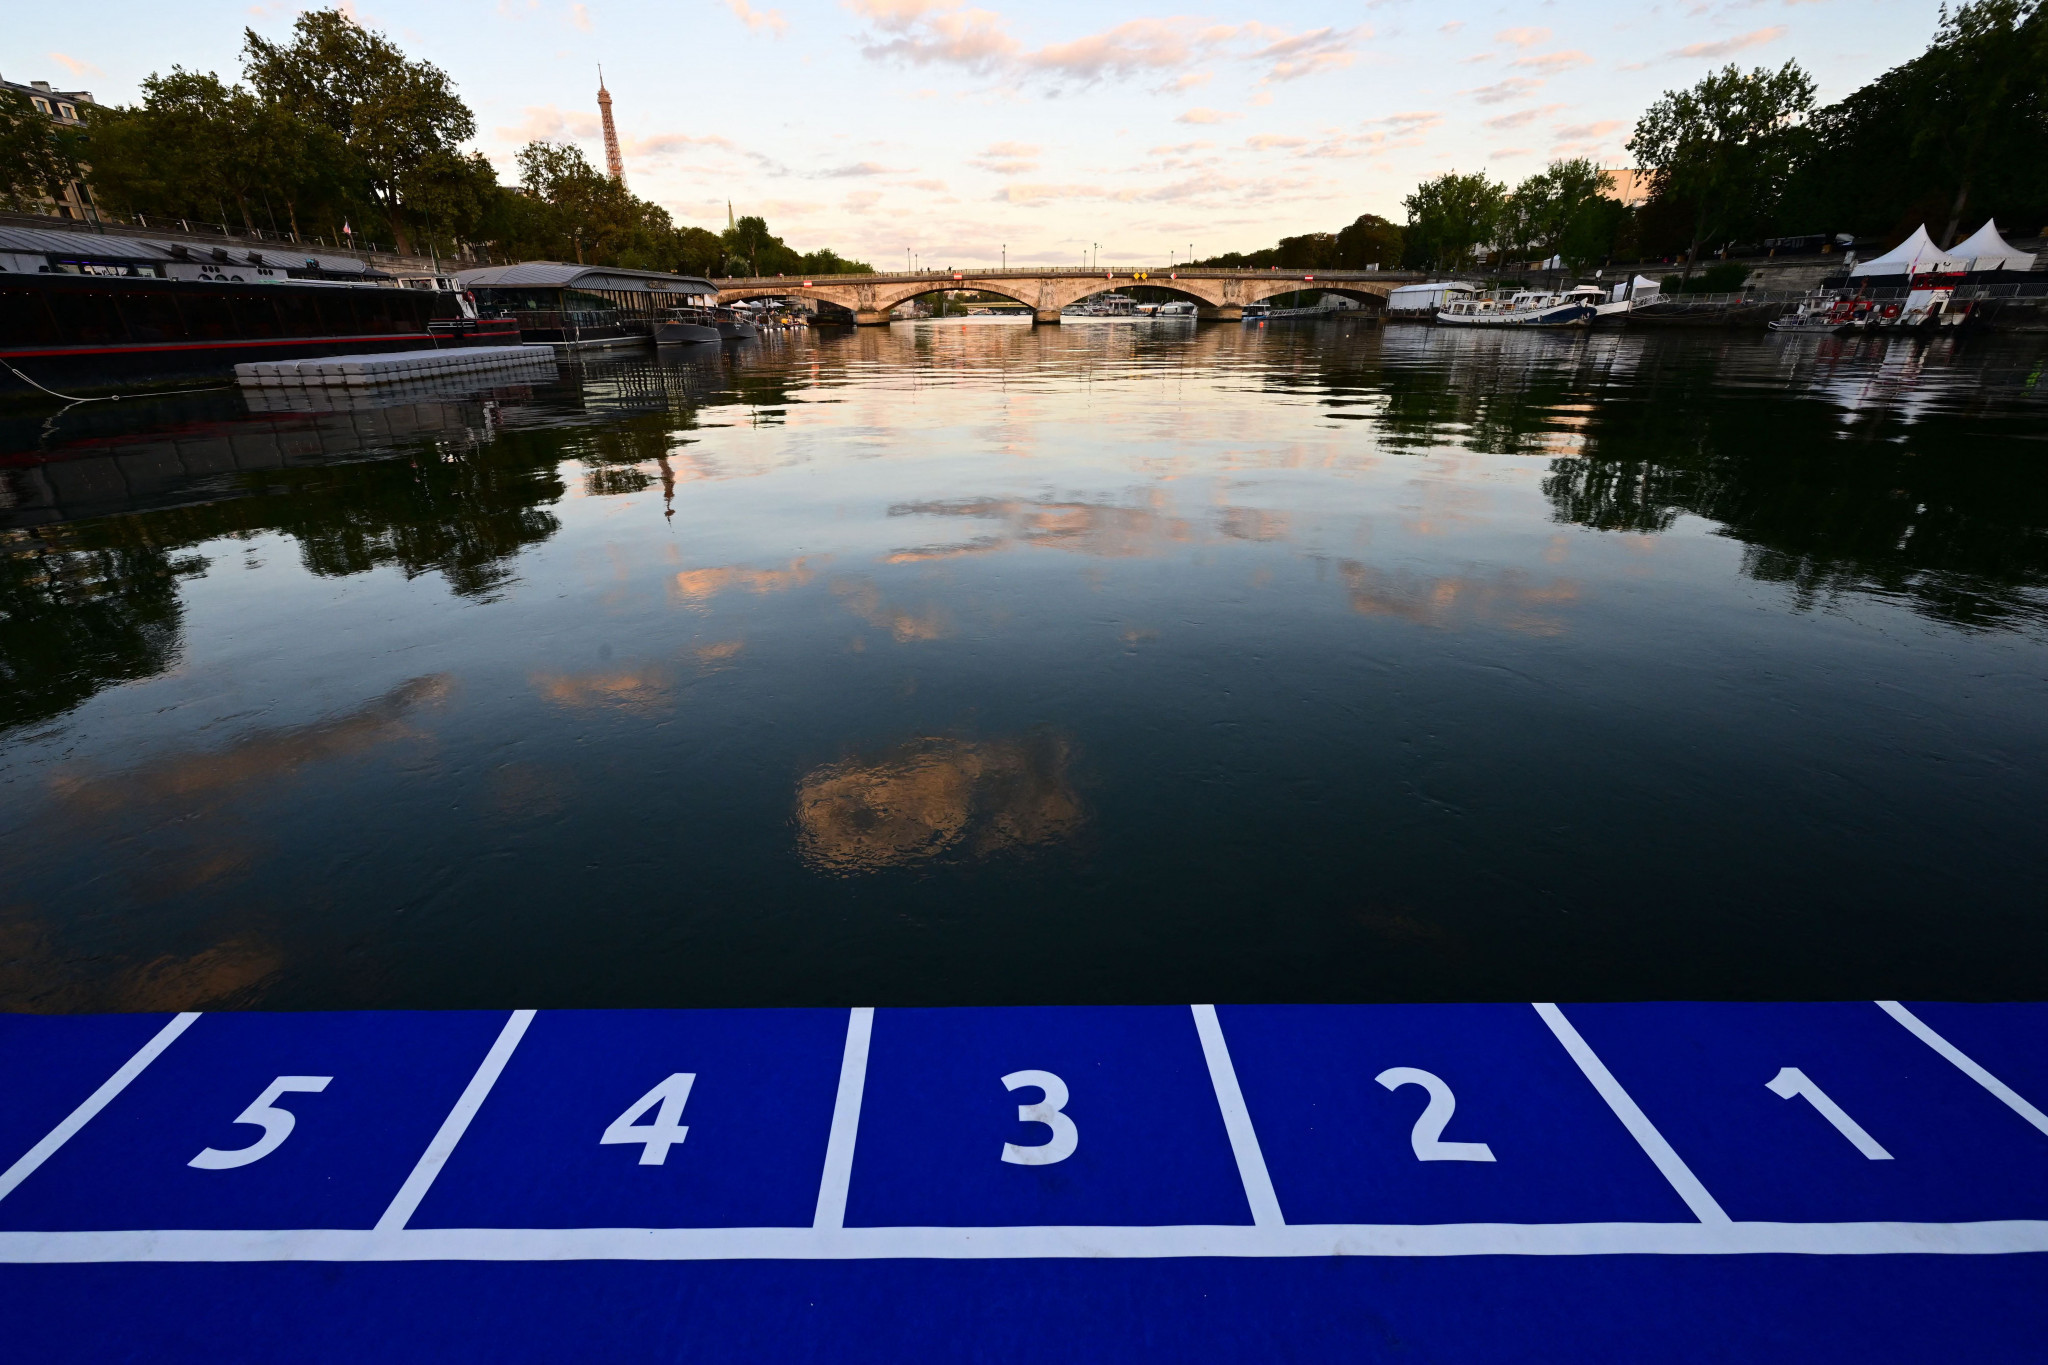 This month's cancellation of the swimming element during the Para triathlon Paris 2024 test event in Paris due to pollution levels in the River Seine now has an explanation, city authorities claim ©Getty Images